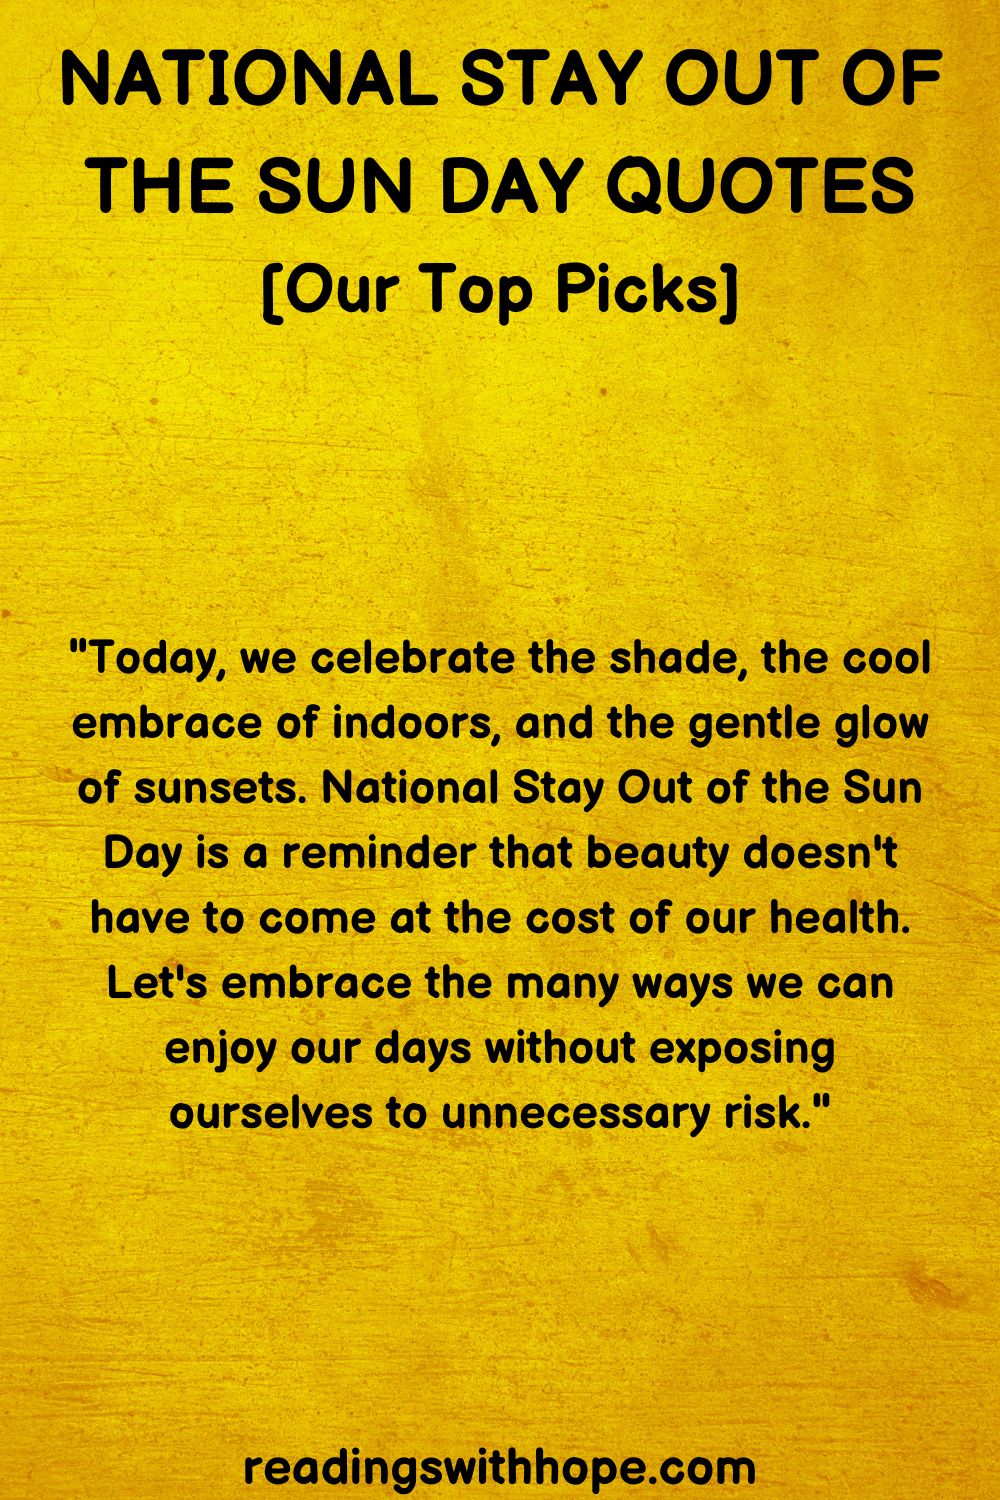 30 National Stay Out of the Sun Day Quotes and Messages